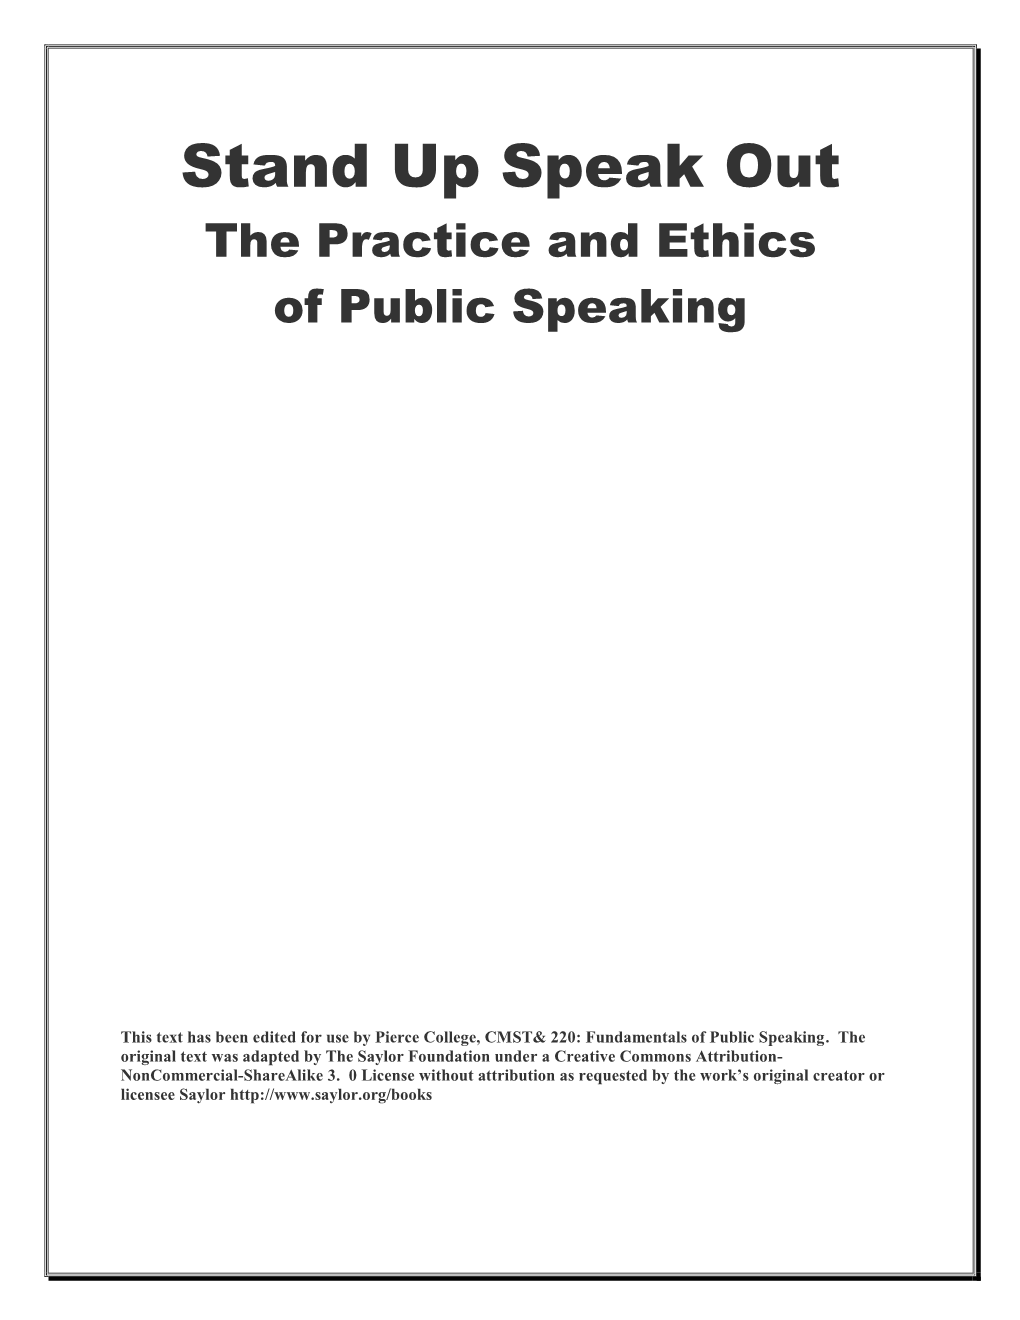 Stand up Speak out the Practice and Ethics of Public Speaking